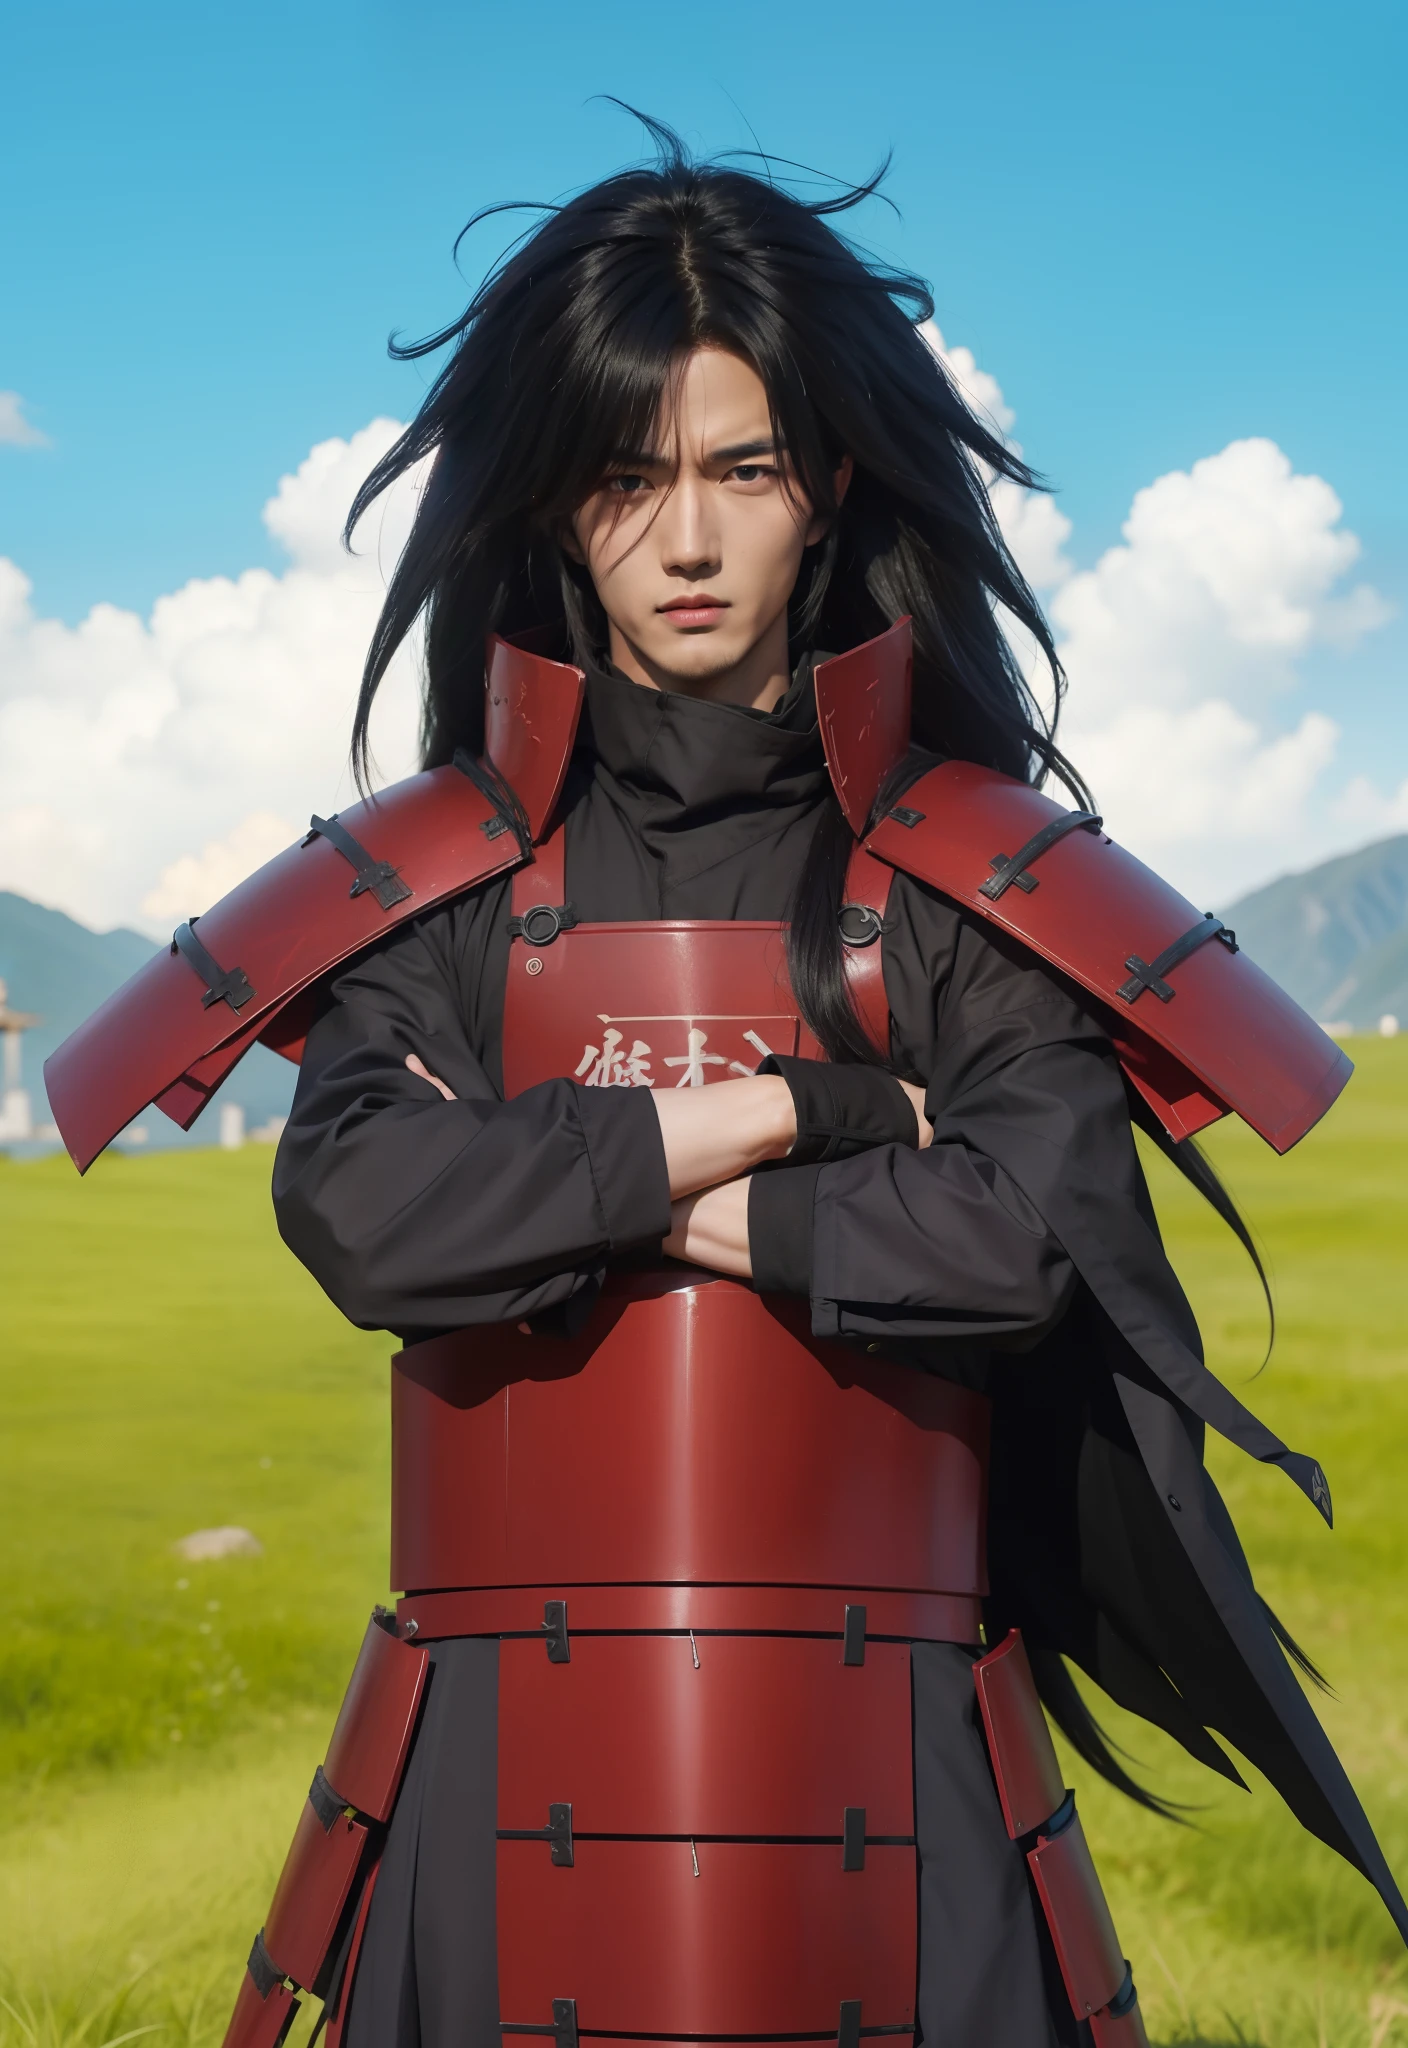 Real life adaption of this character,his name is Madara uchiha from anime Naruto,Korean adult handsome face,realistic long messy hair,realistic outfit with red iron armor like samurai,realistic light,realistic shadow,realistic background,(photorealistic:1.2)